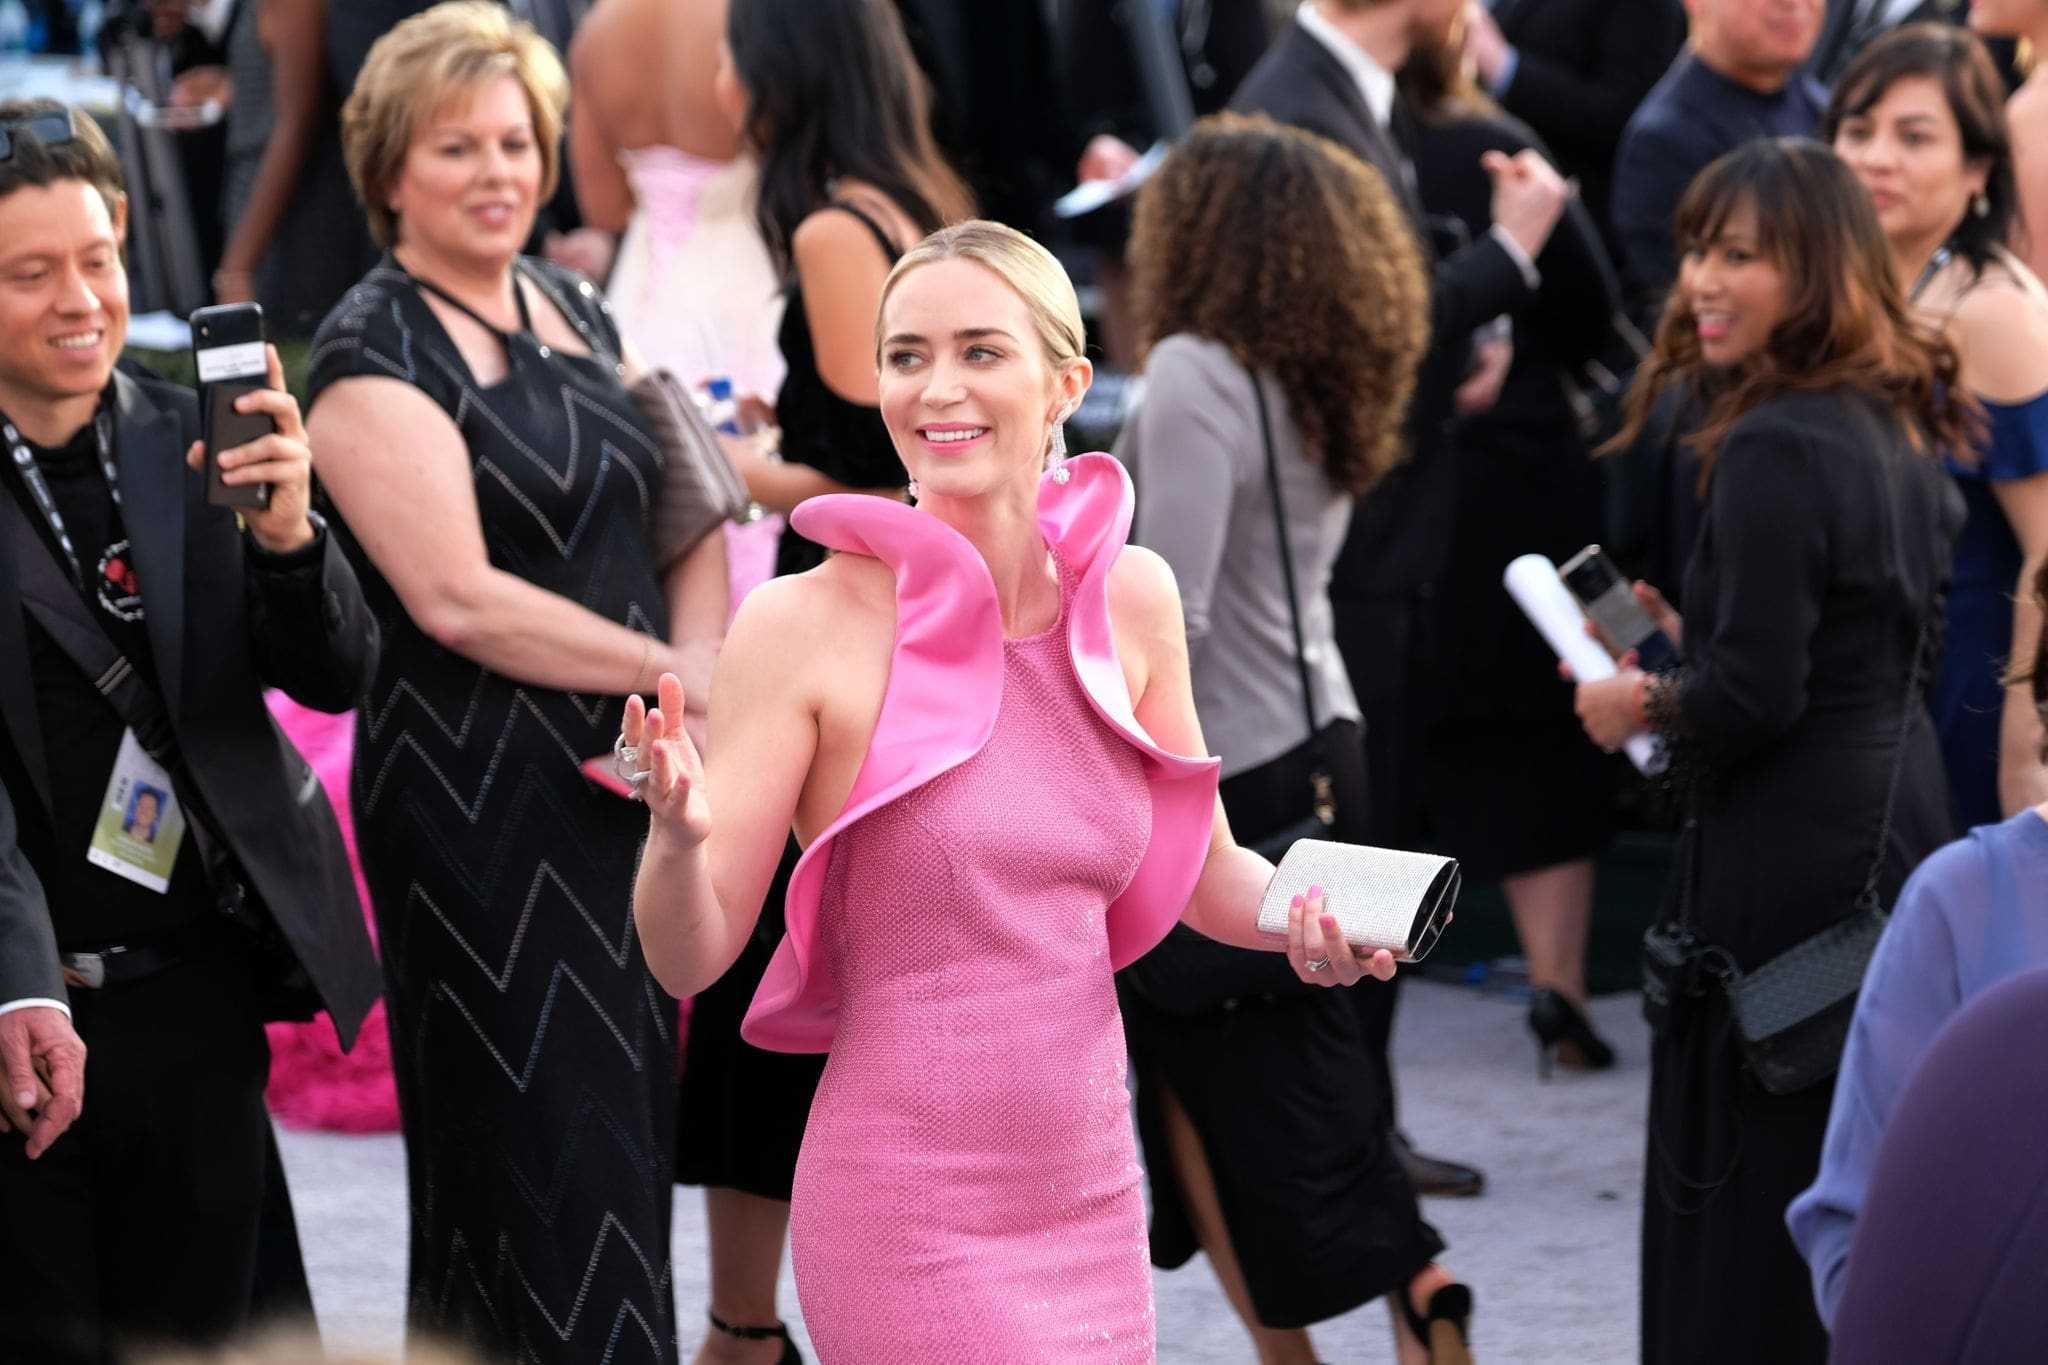 Emily_Blunt_-_25th_Annual_Screen_Actors_Guild_Awards_Behind_The_Scenes_in_Los_Angeles_01272019-13.jpg